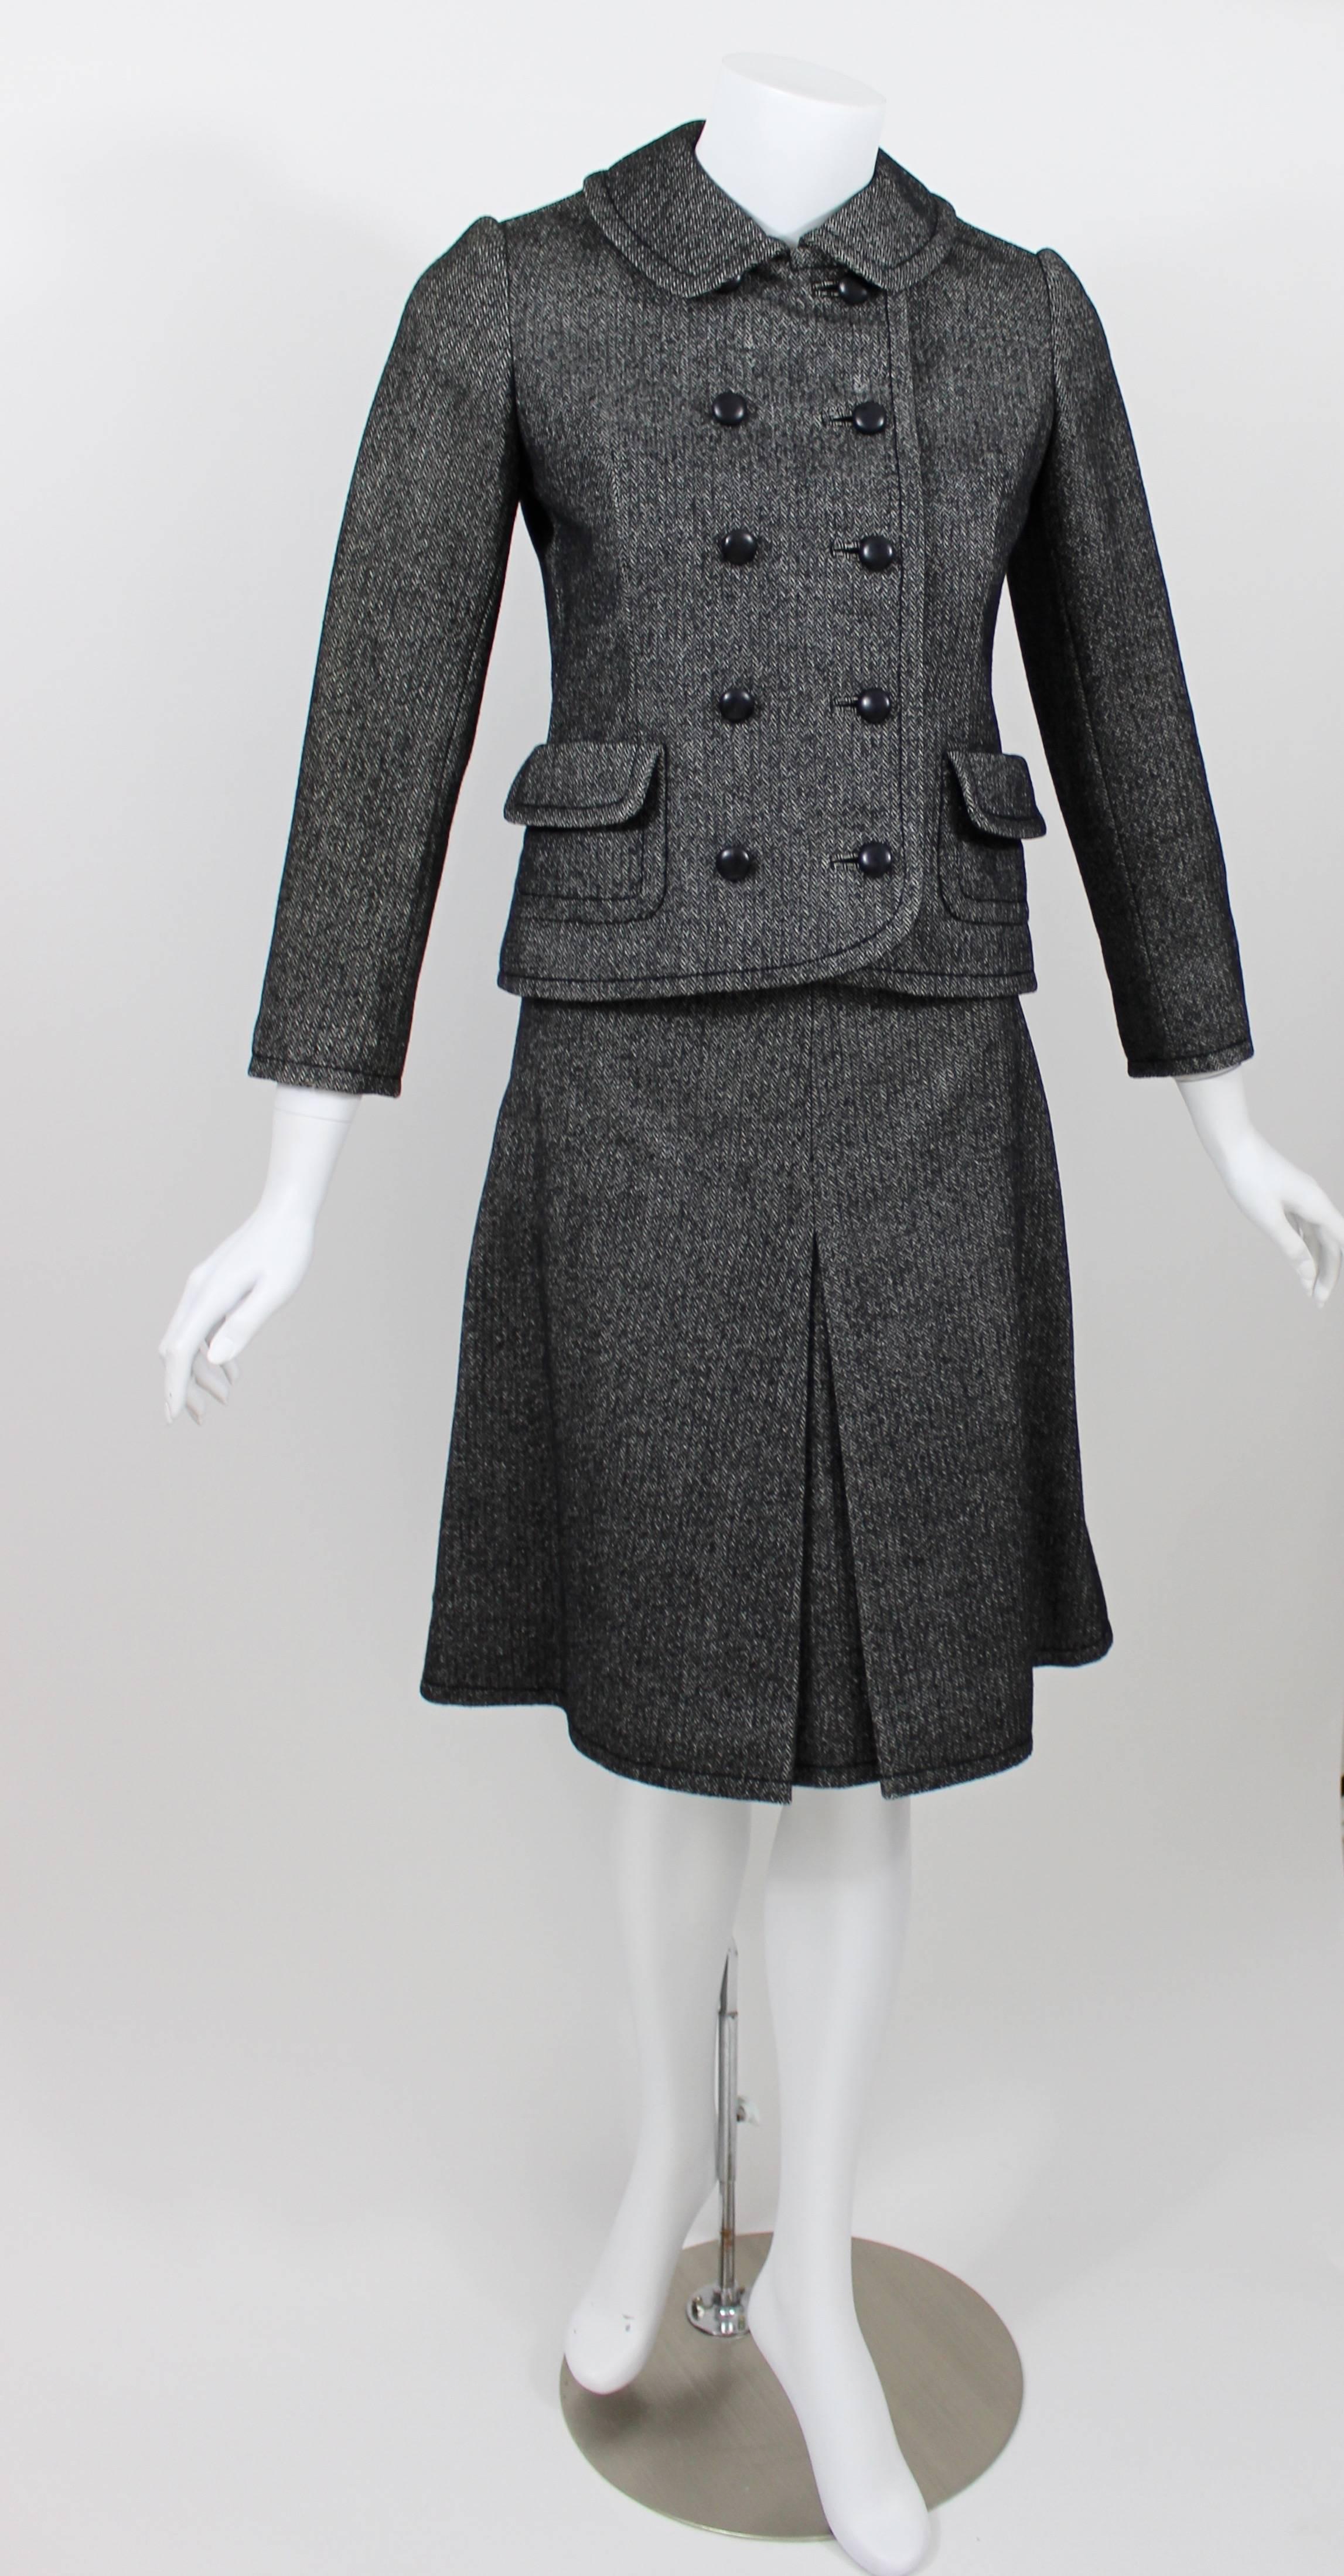 A vintage skirt suit from Bergdorf Goodman circa 1960s.
Wool herringbone.
Peacoat style jacket
Skirt is knee length a line with a front inverted pleat.
The skirt has metal zipper closures on each side.
Fully lined.
Excellent